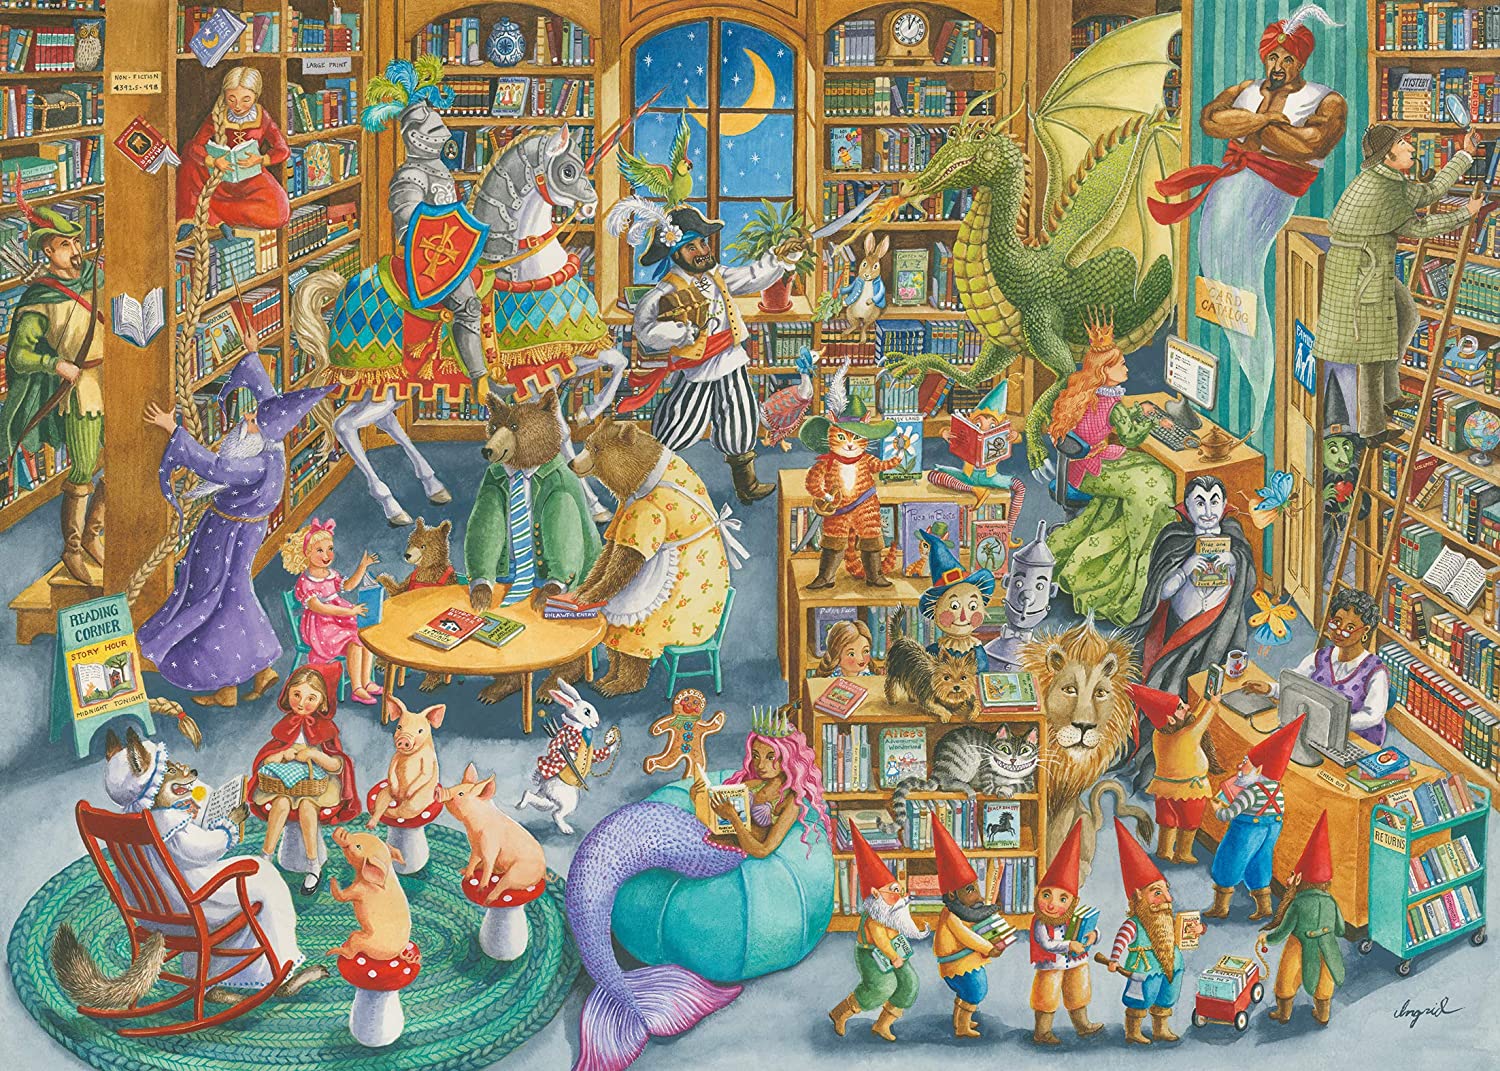 Midnight at the Library Puzzle 1,000 Pieces by Ravensburger #16455